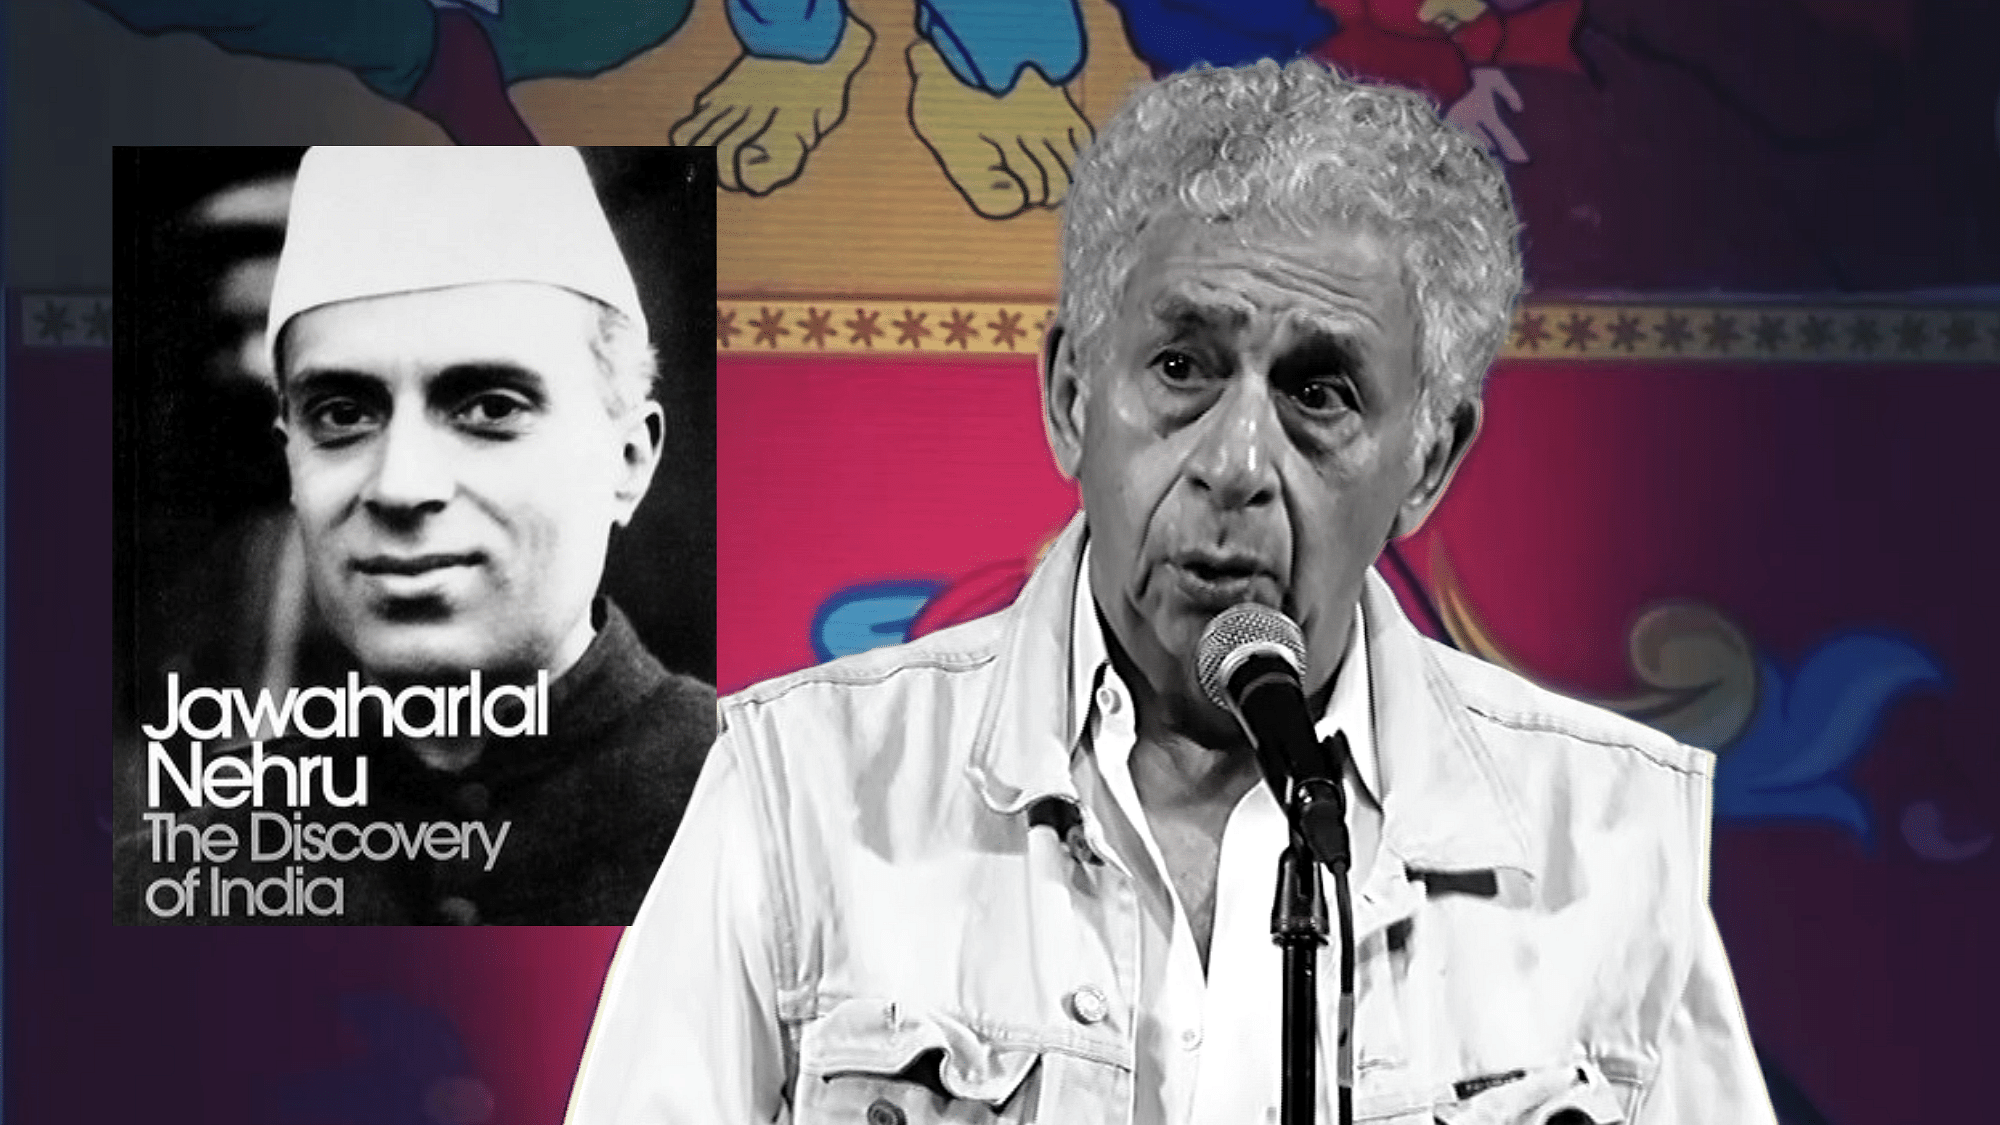 Actor Naseeruddin Shah reads an excerpt from Jawaharlal Nehru’s ‘The Discovery of India’ at the ‘India My Valentine’ event in Mumbai on 16 February.